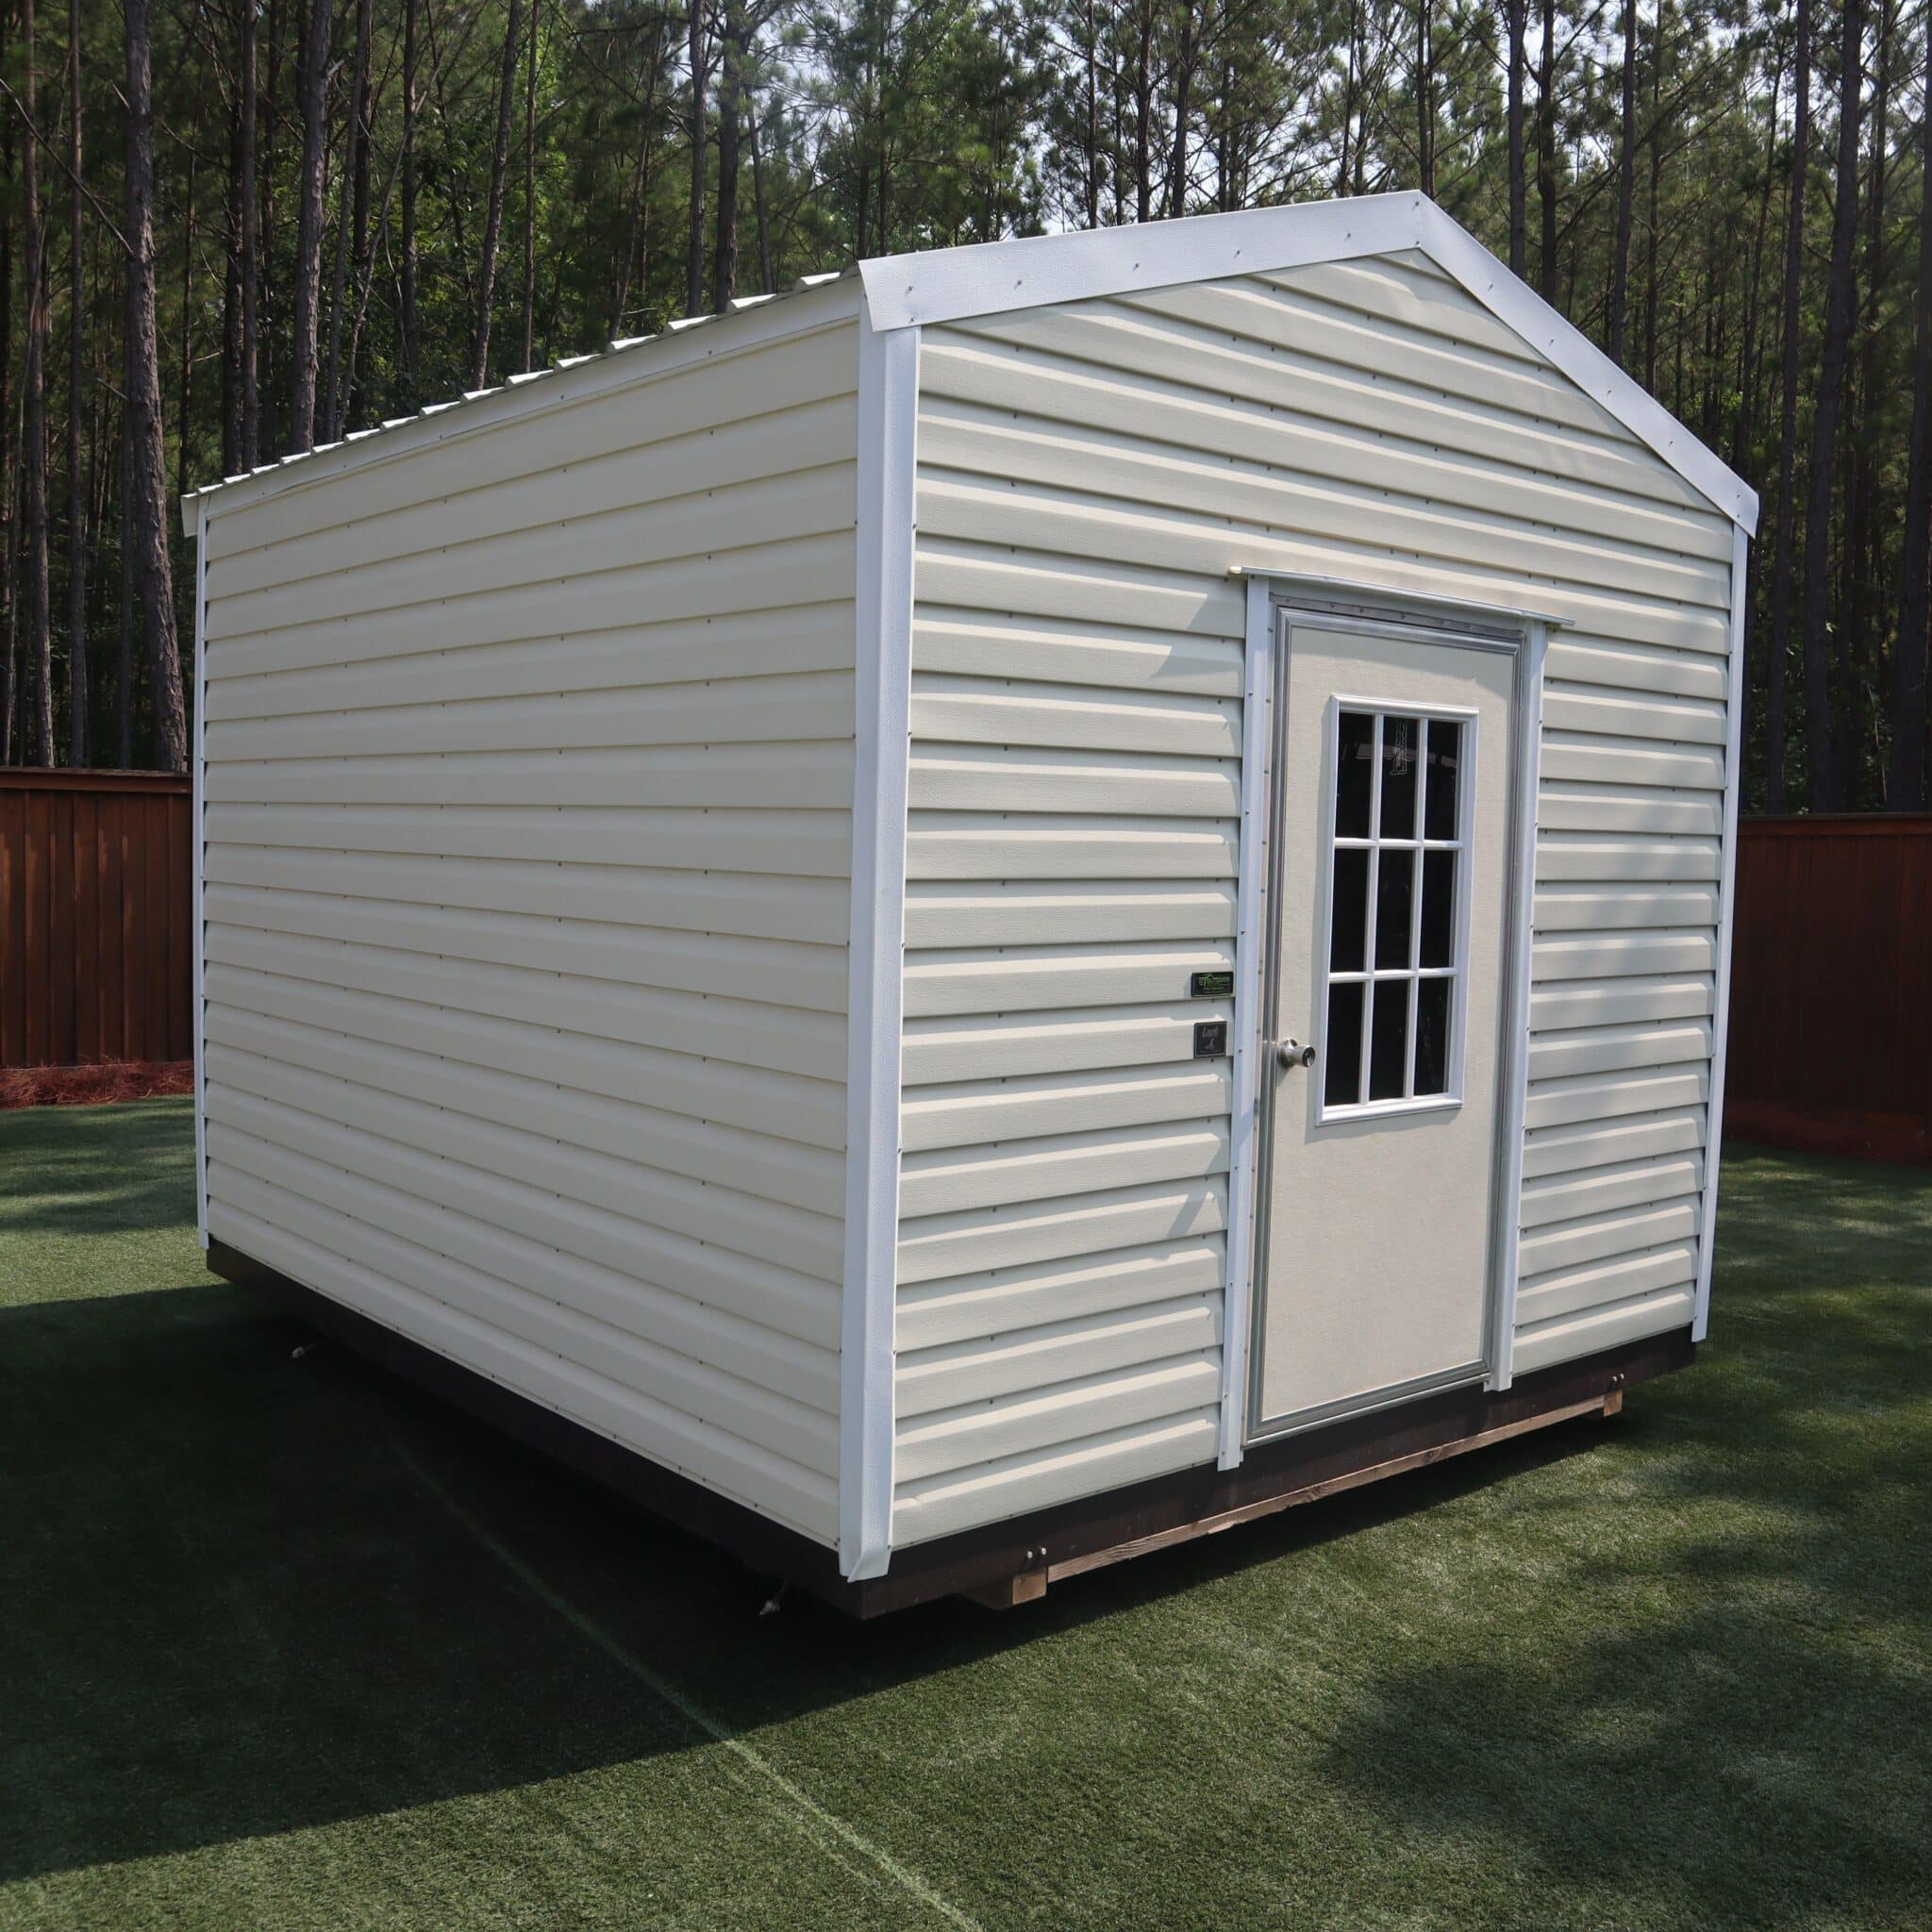 OutdoorOptions Eatonton Georgia 31024 Shed Picture Replace 113 Storage For Your Life Outdoor Options